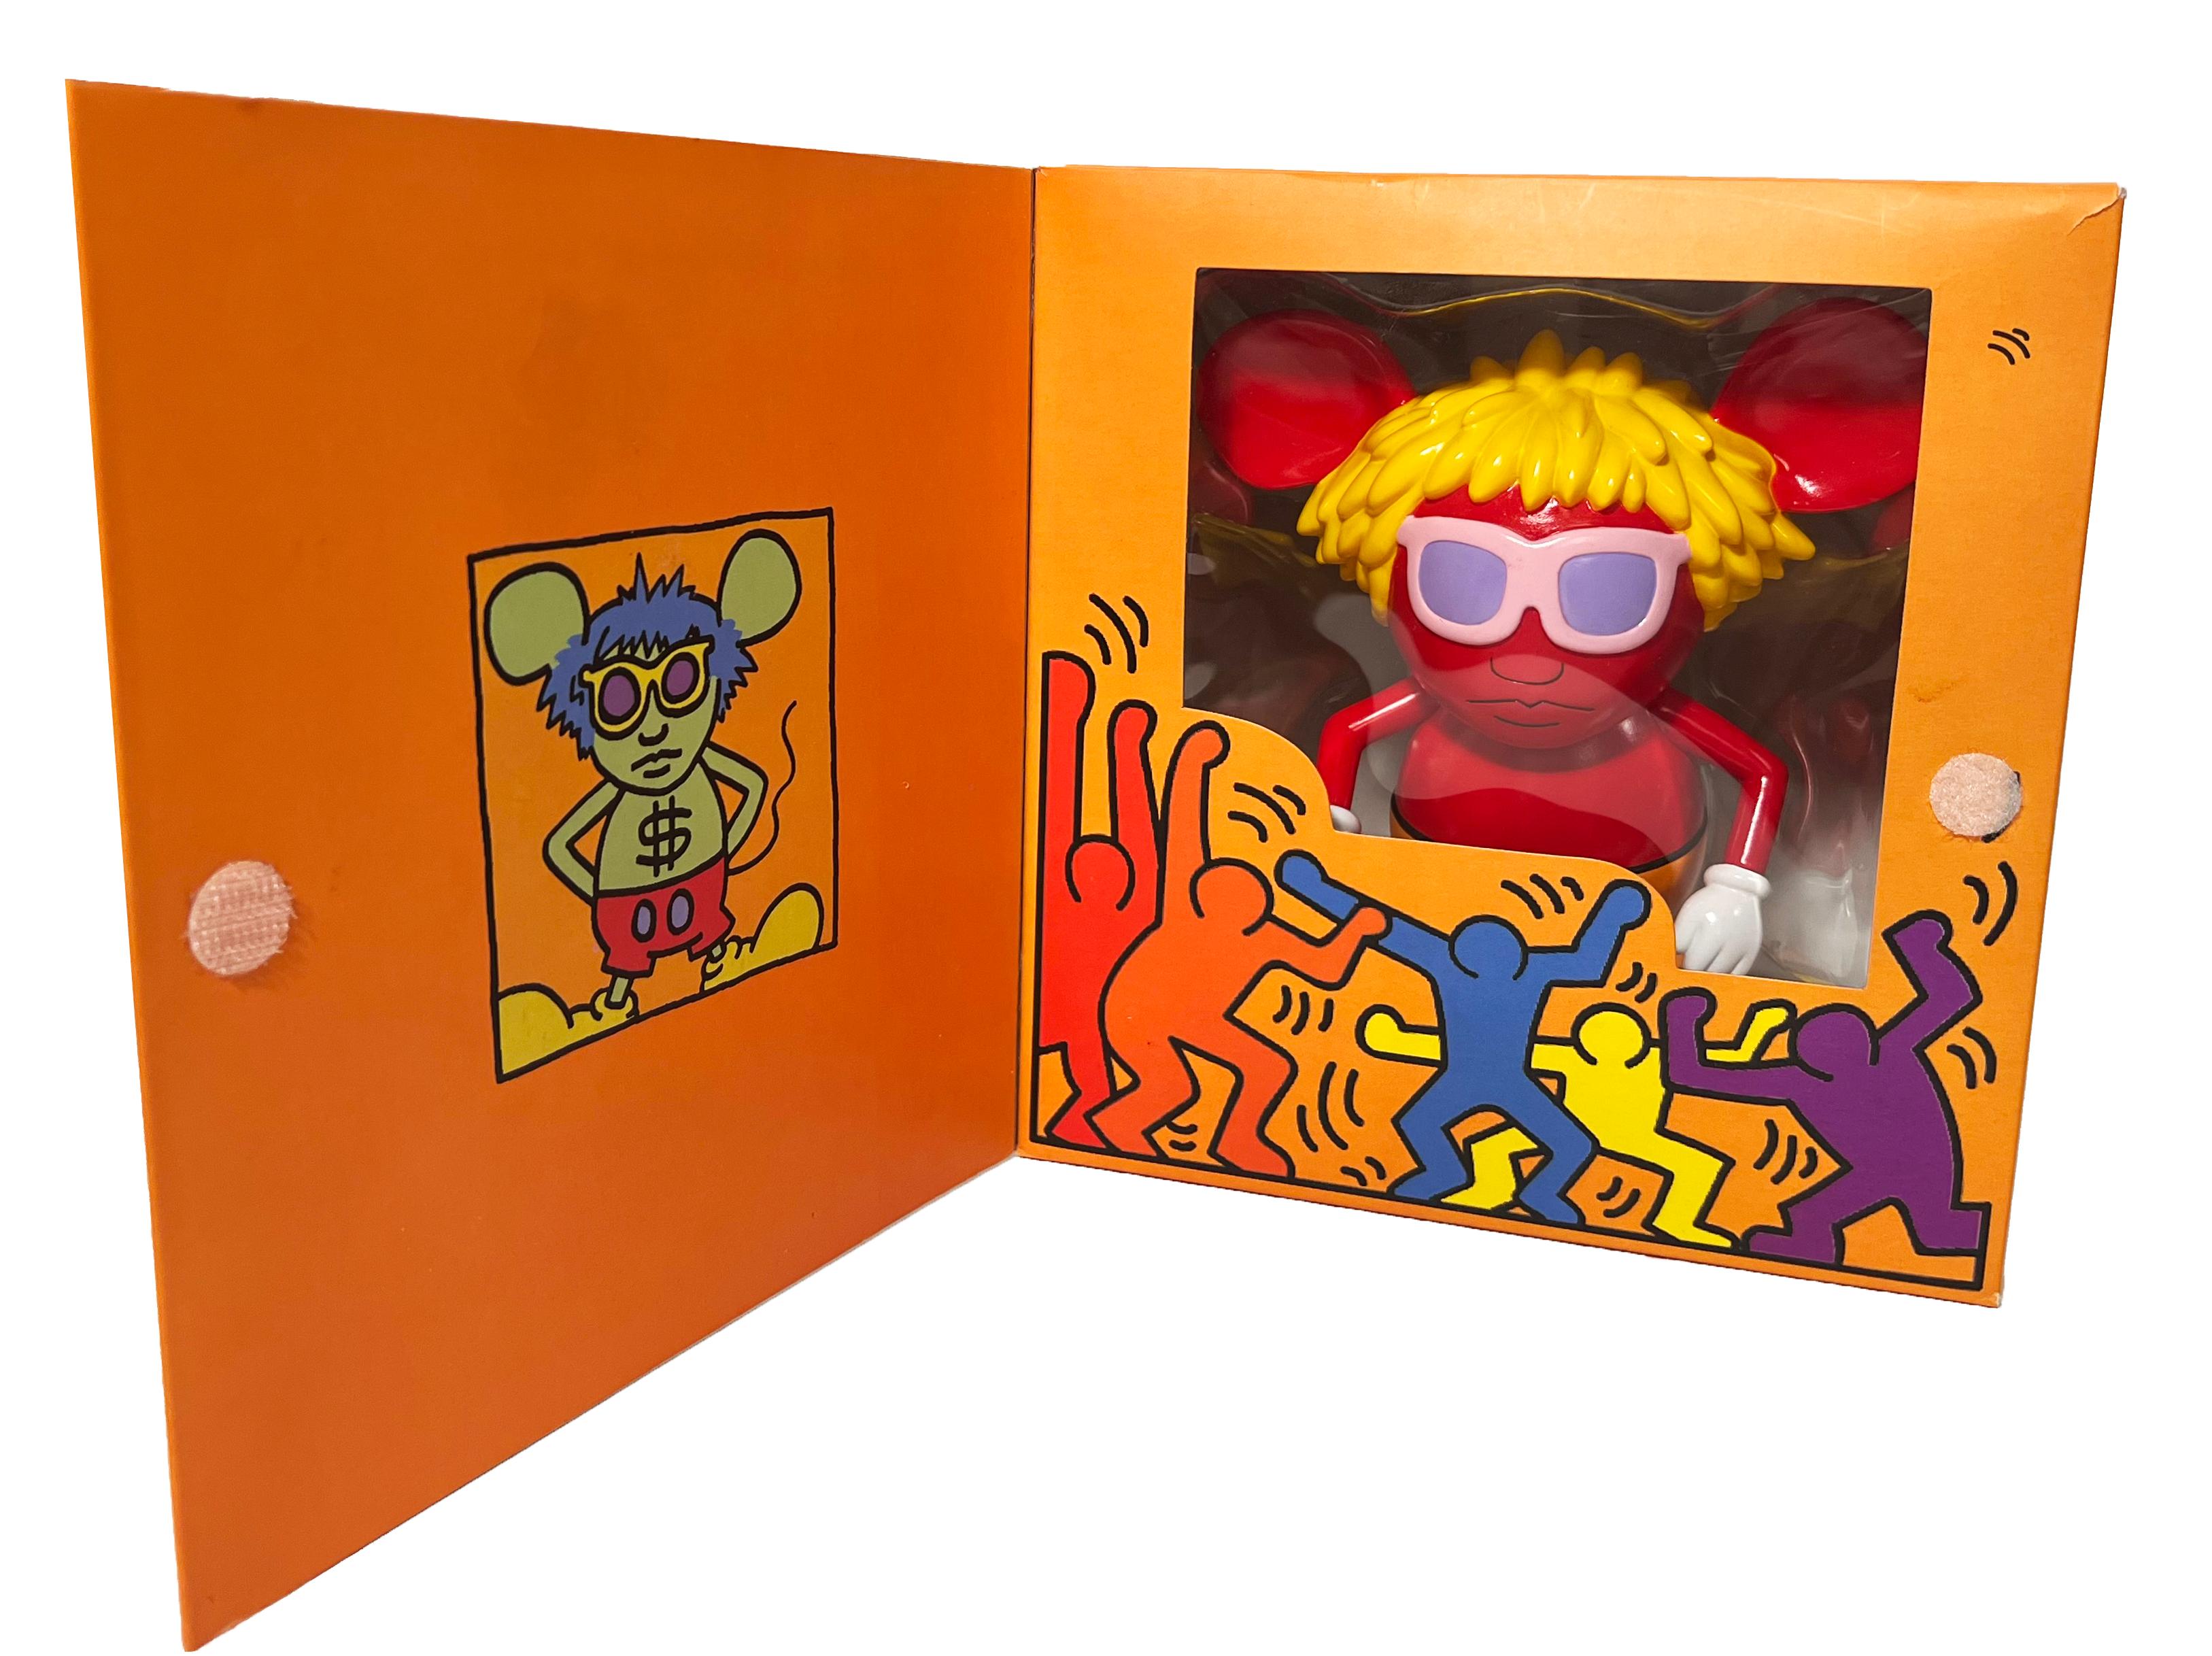 Keith Haring Andy Mouse art toy (Keith Haring Andy Warhol)